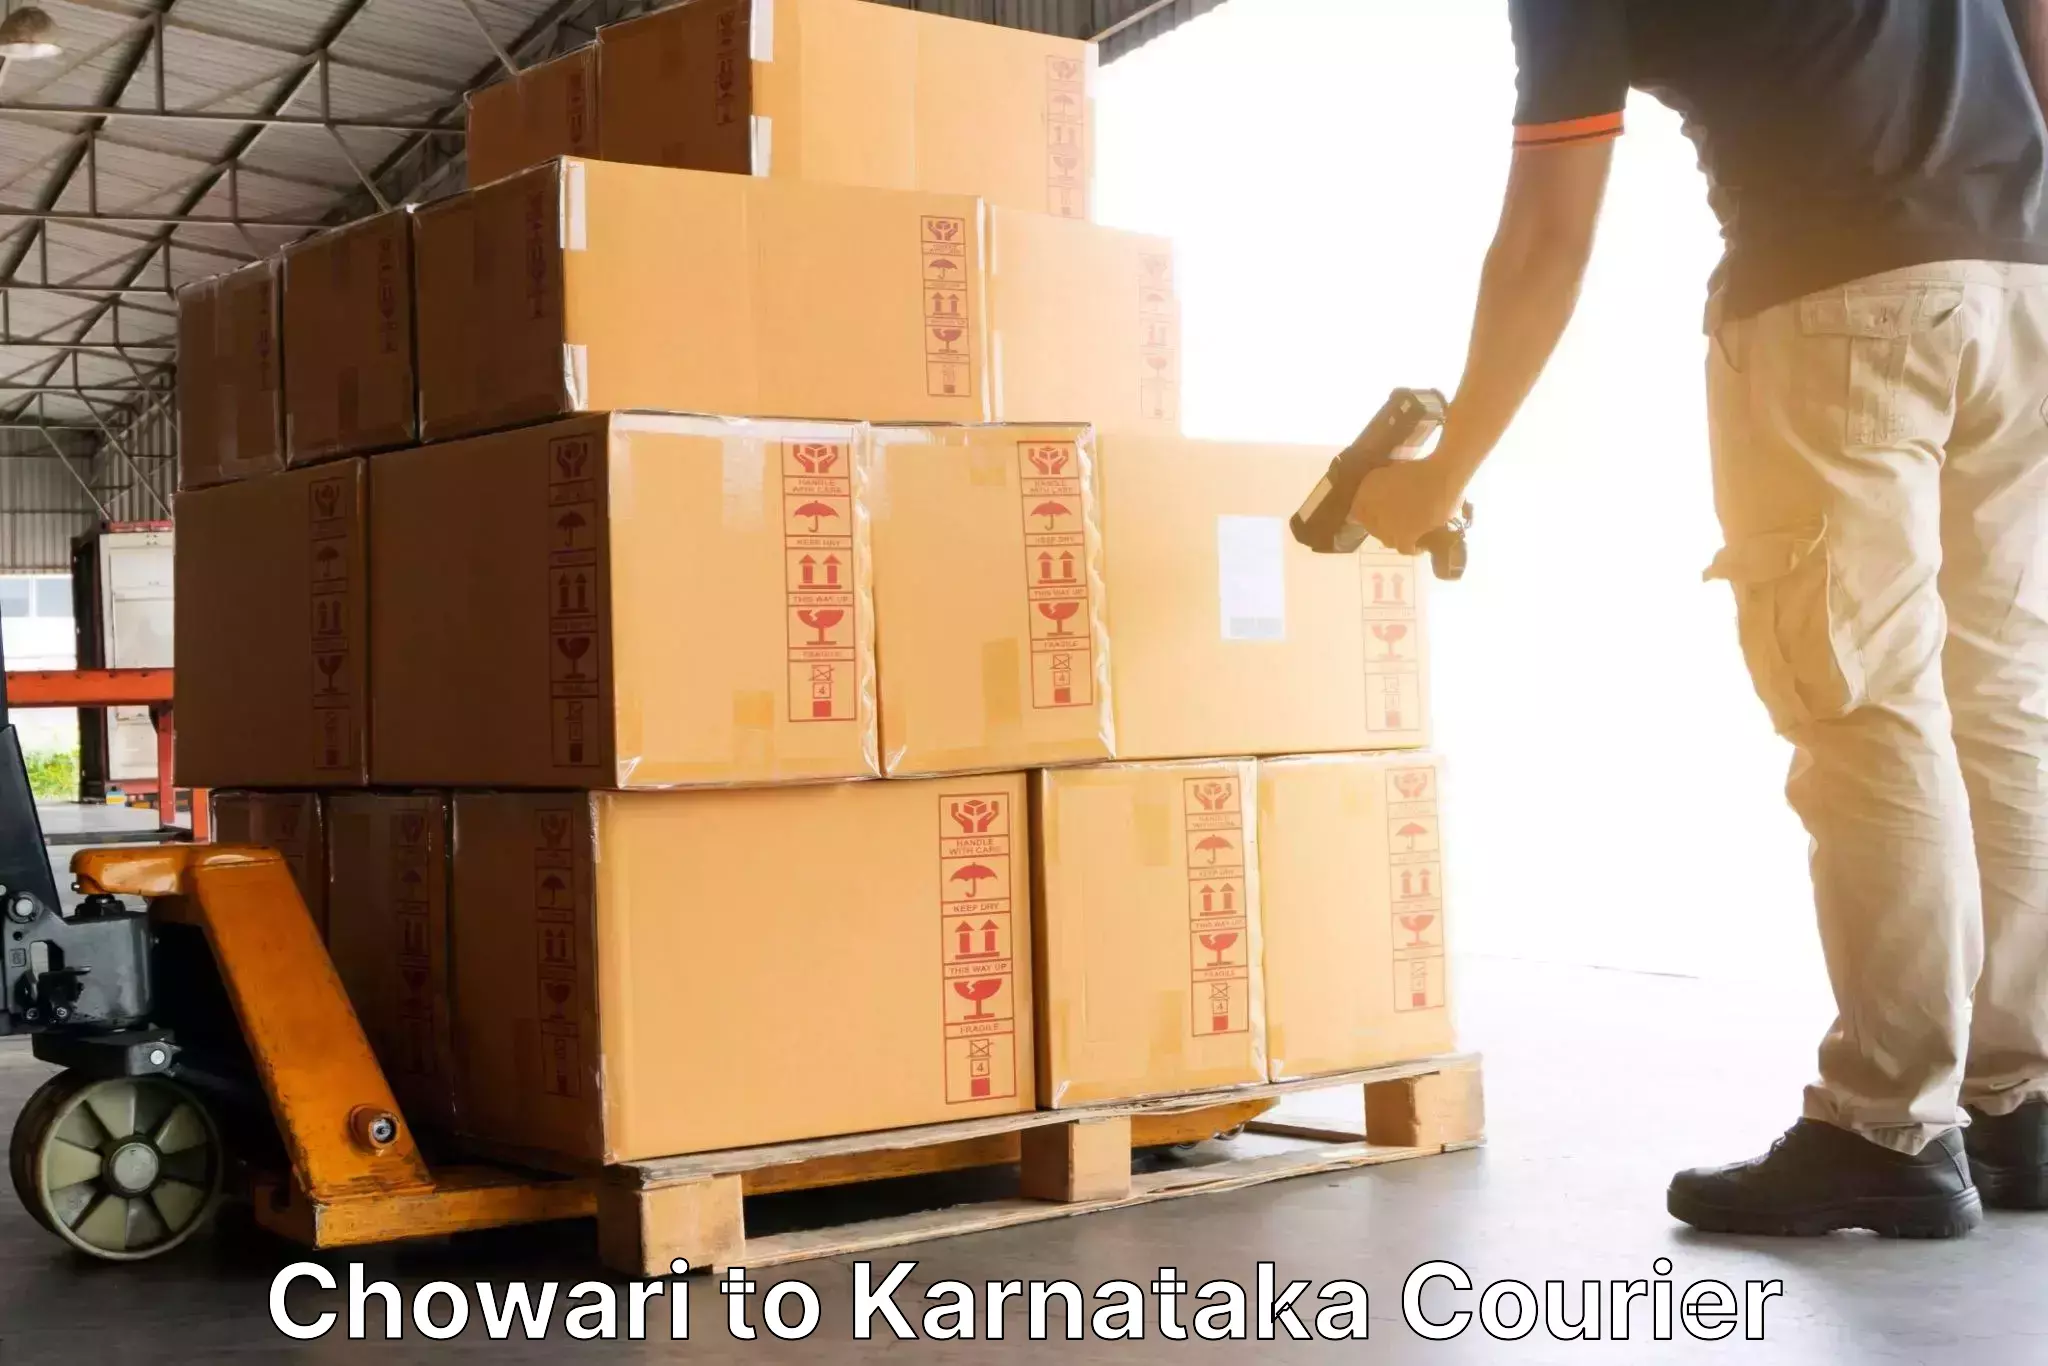 Multi-national courier services Chowari to Mysore University